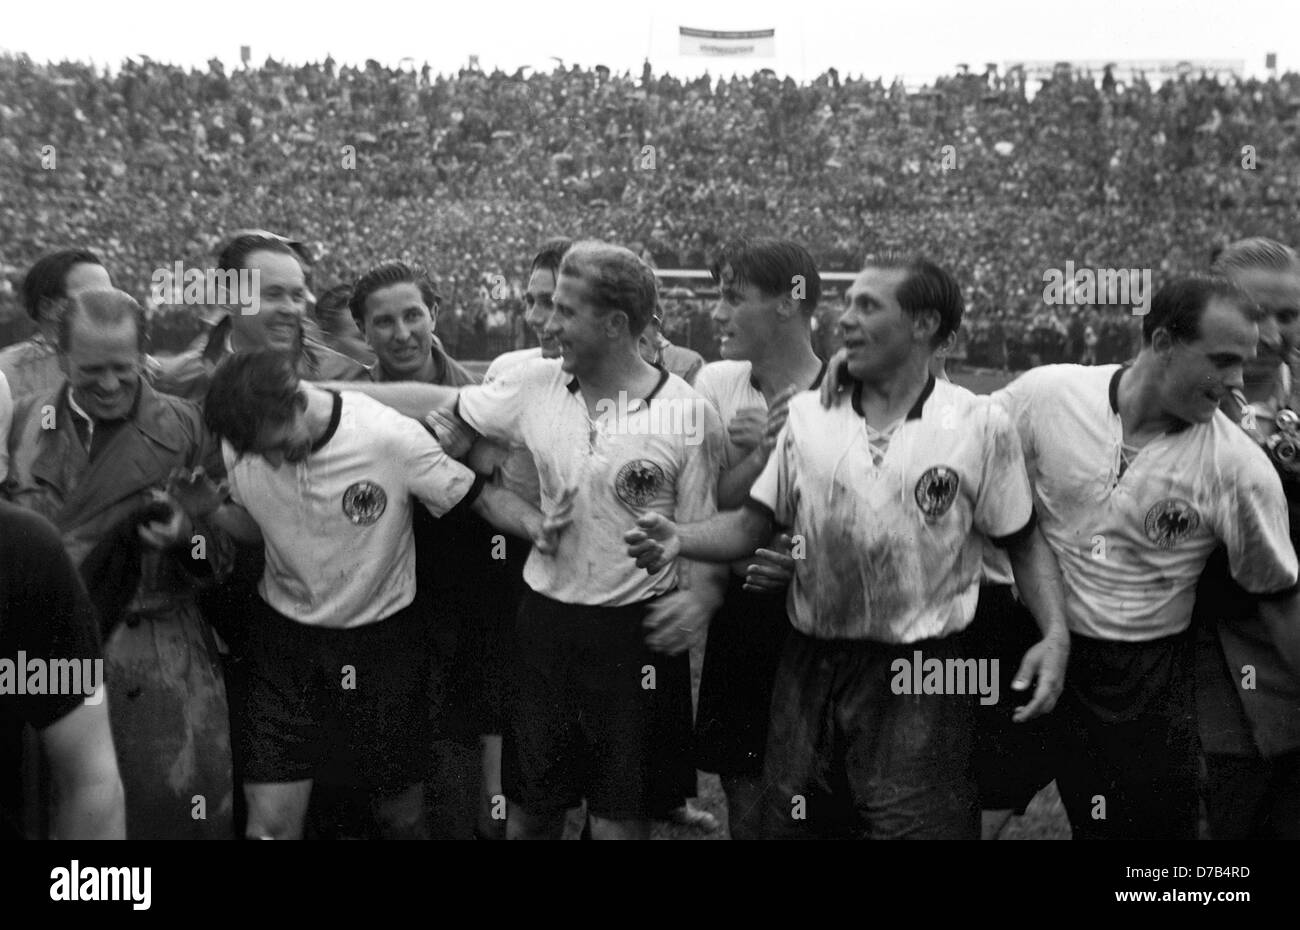 Germany wins the final match of the soccer world championship against Hungary on the 4th of July in 1954 in Bern. The picture shows (l-r) coach Sepp Herberger, captain Fritz Walter, physiotherapist Erich Deuser, team medicine Dr. Franz Loogen, Horst Eckel (half head), Werner Liebrich, Ottmar Walter, Max Morlock and Werner Kohlmeyer. Stock Photo